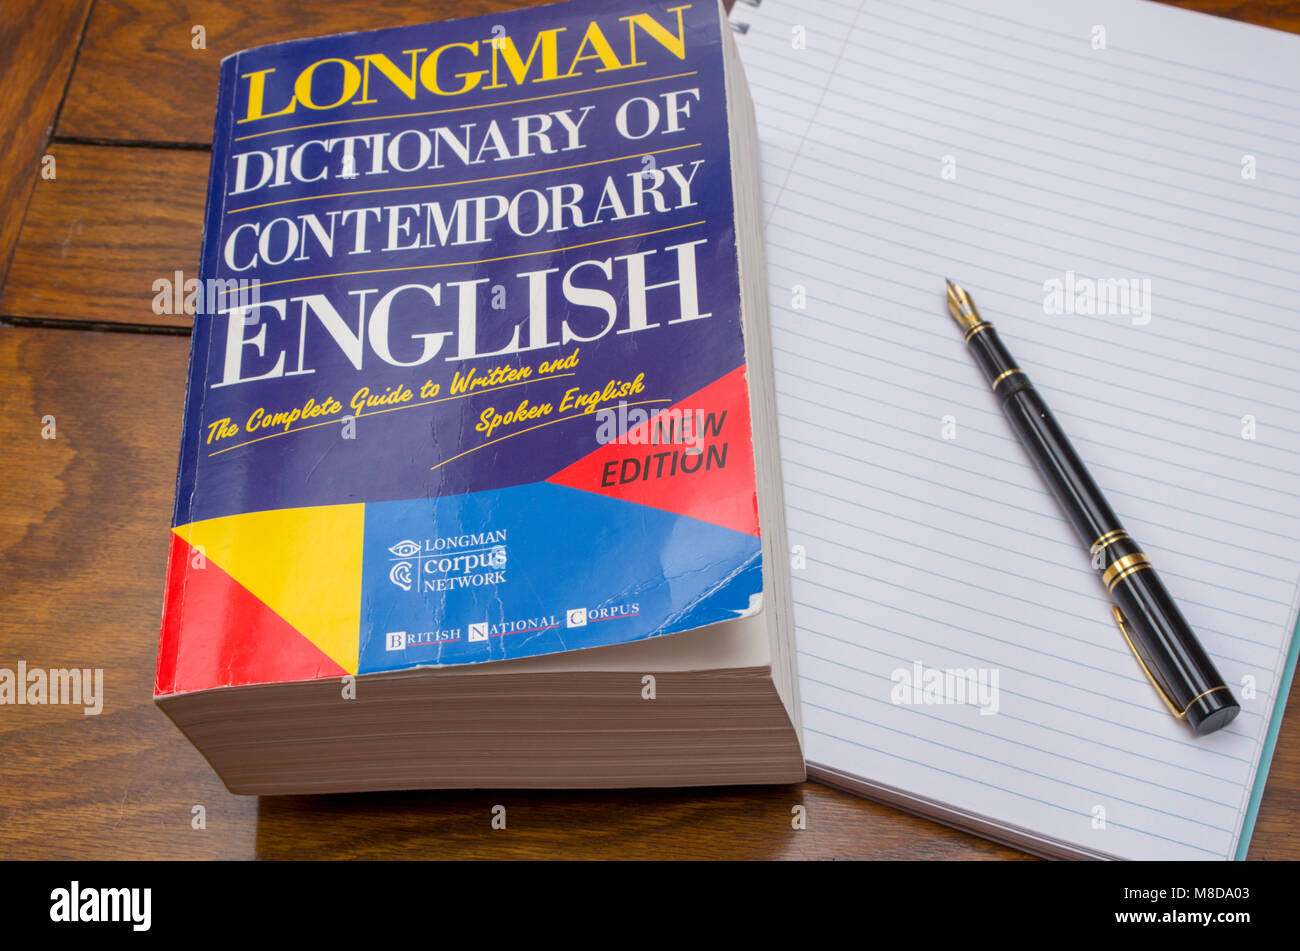 lining, meaning of lining in Longman Dictionary of Contemporary English